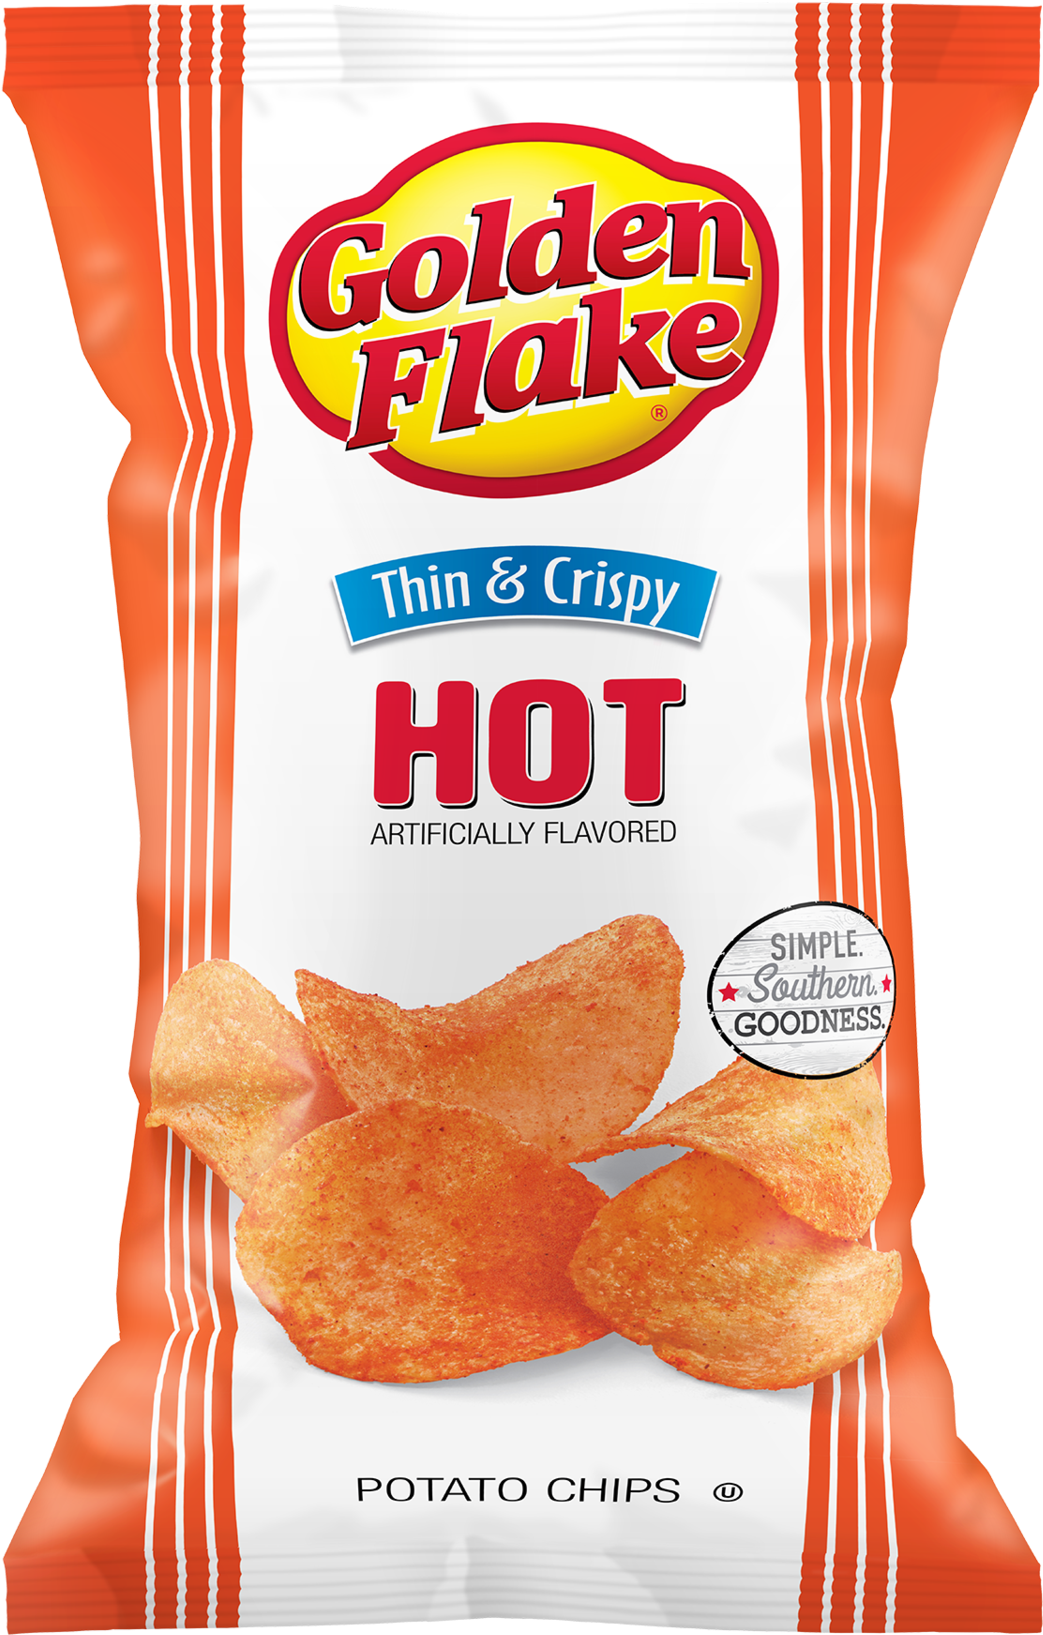 Golden Flake Hot Thin Crispy Chips Package